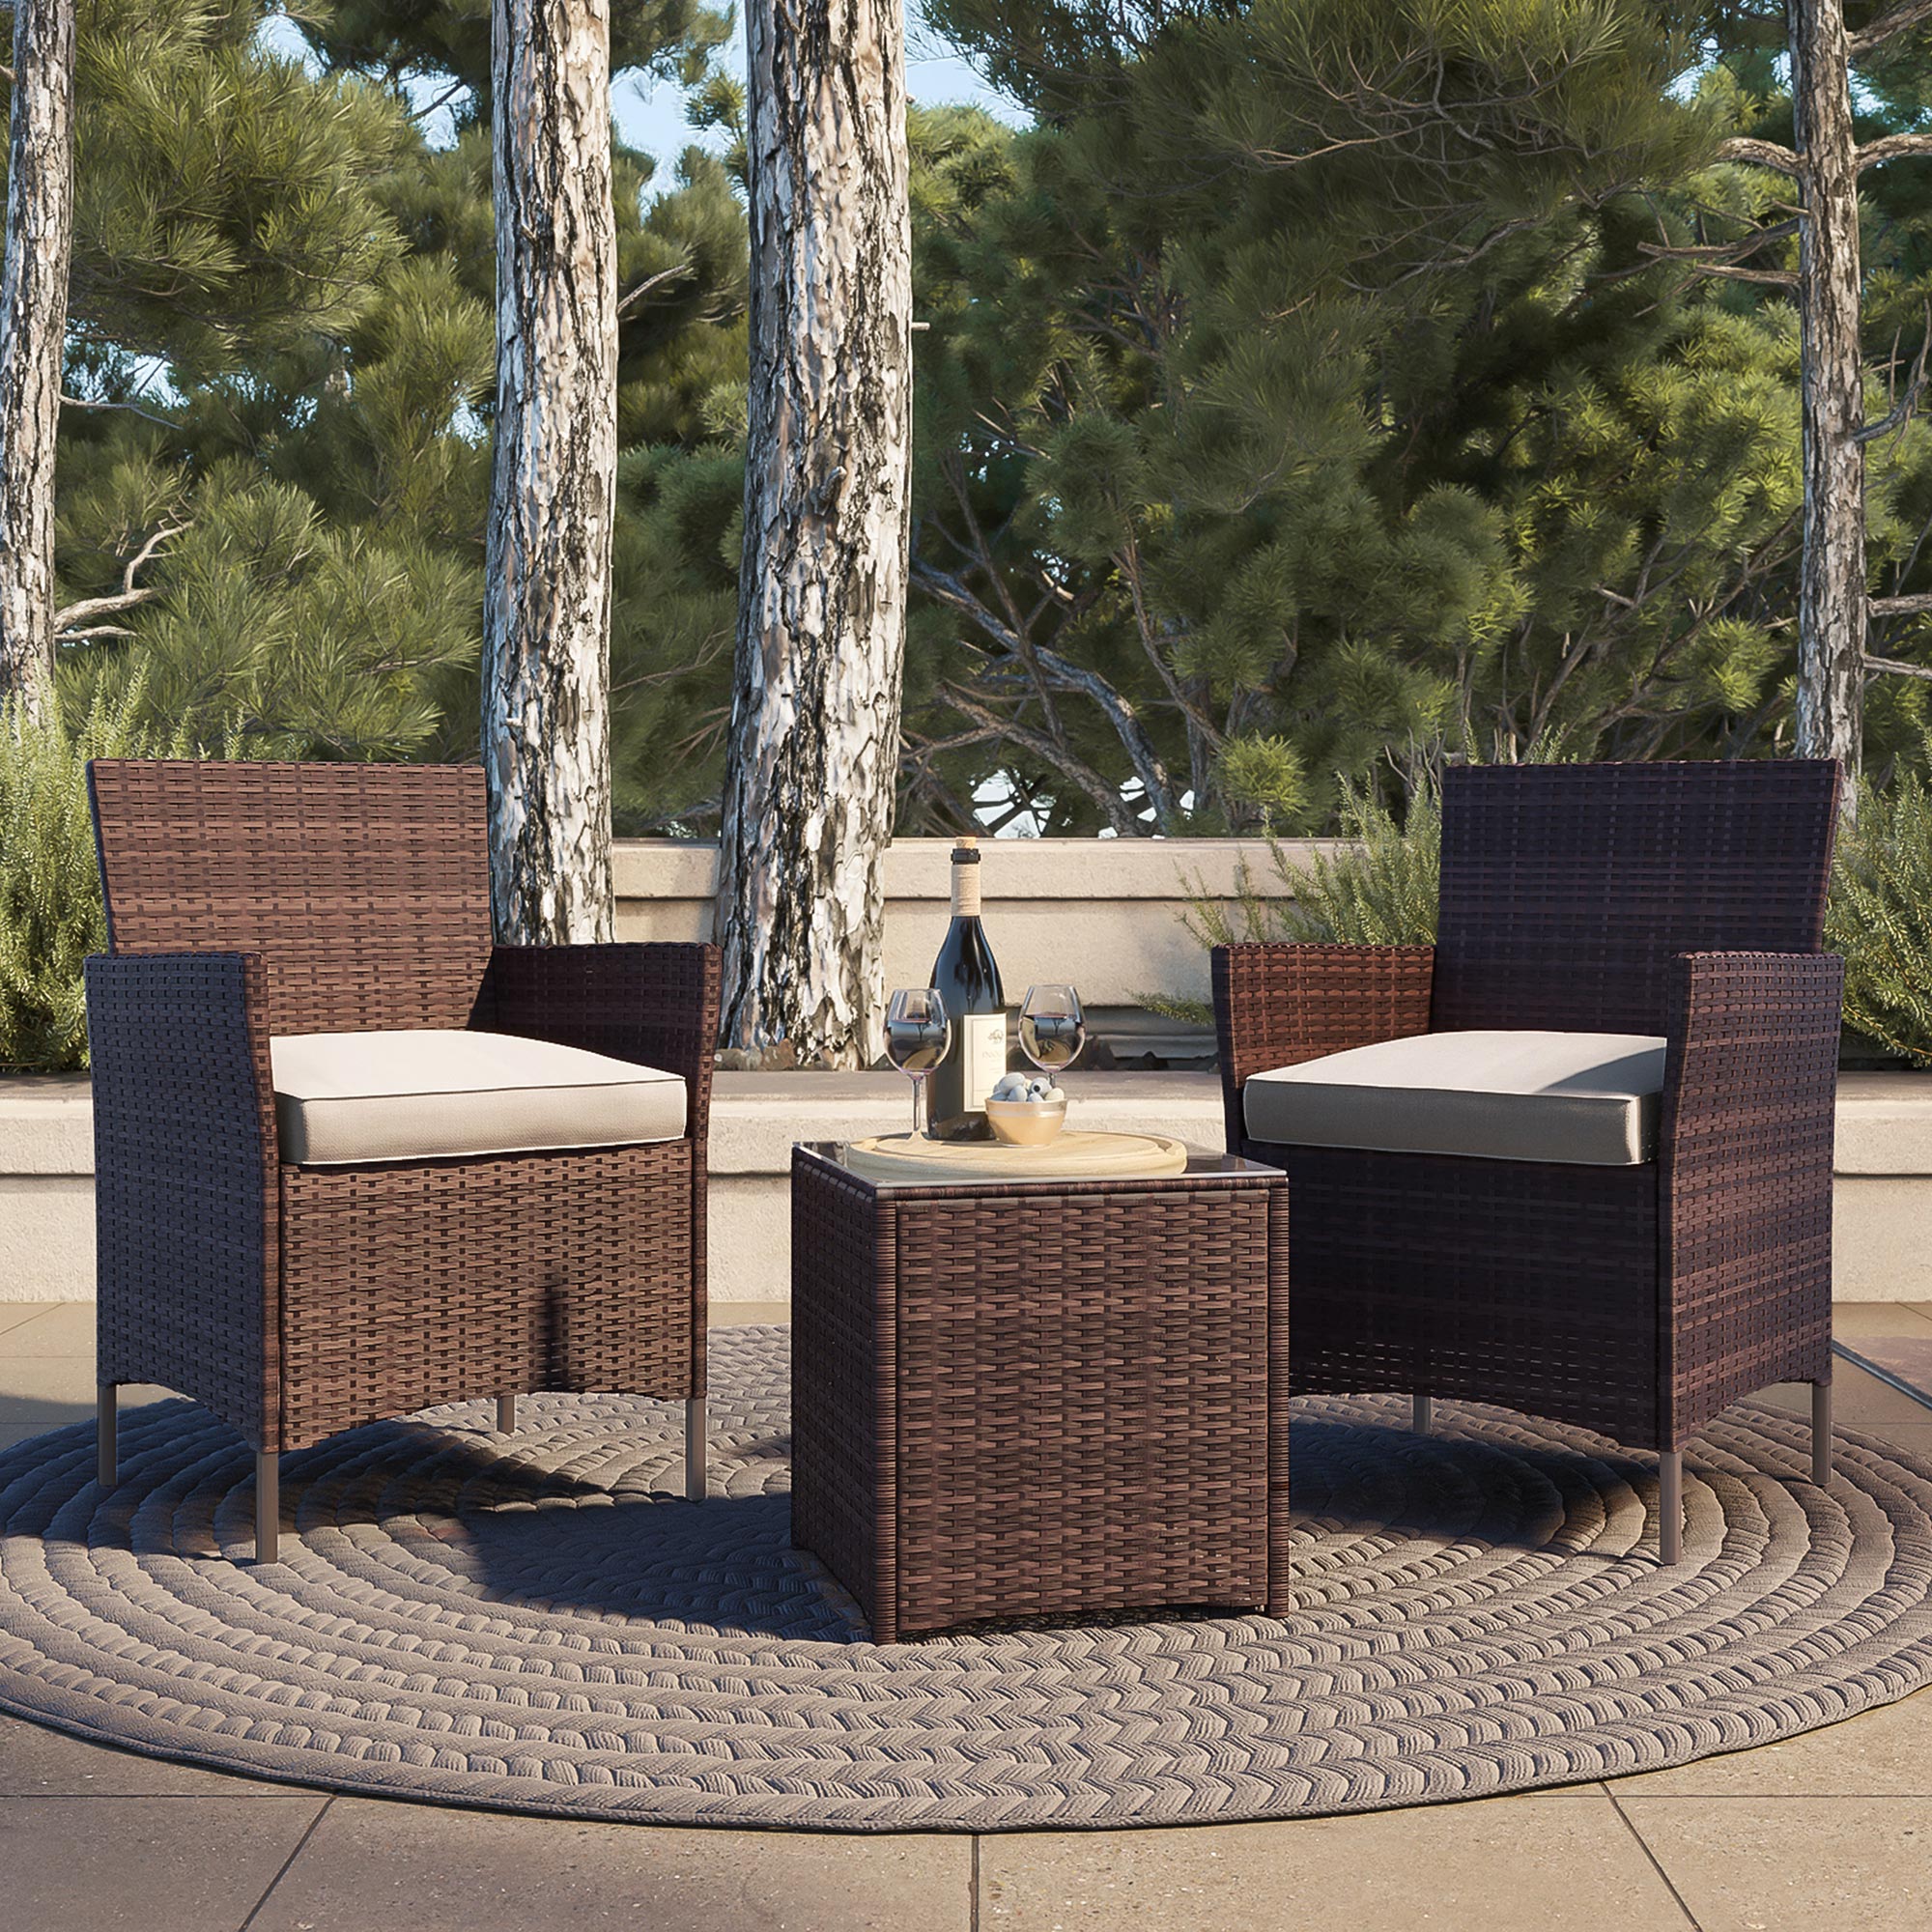 BELLEZE Wicker Furniture Outdoor Set 3 Piece Patio Outdoor Rattan Patio Set Two Chairs One Glass Table Brown - image 1 of 6